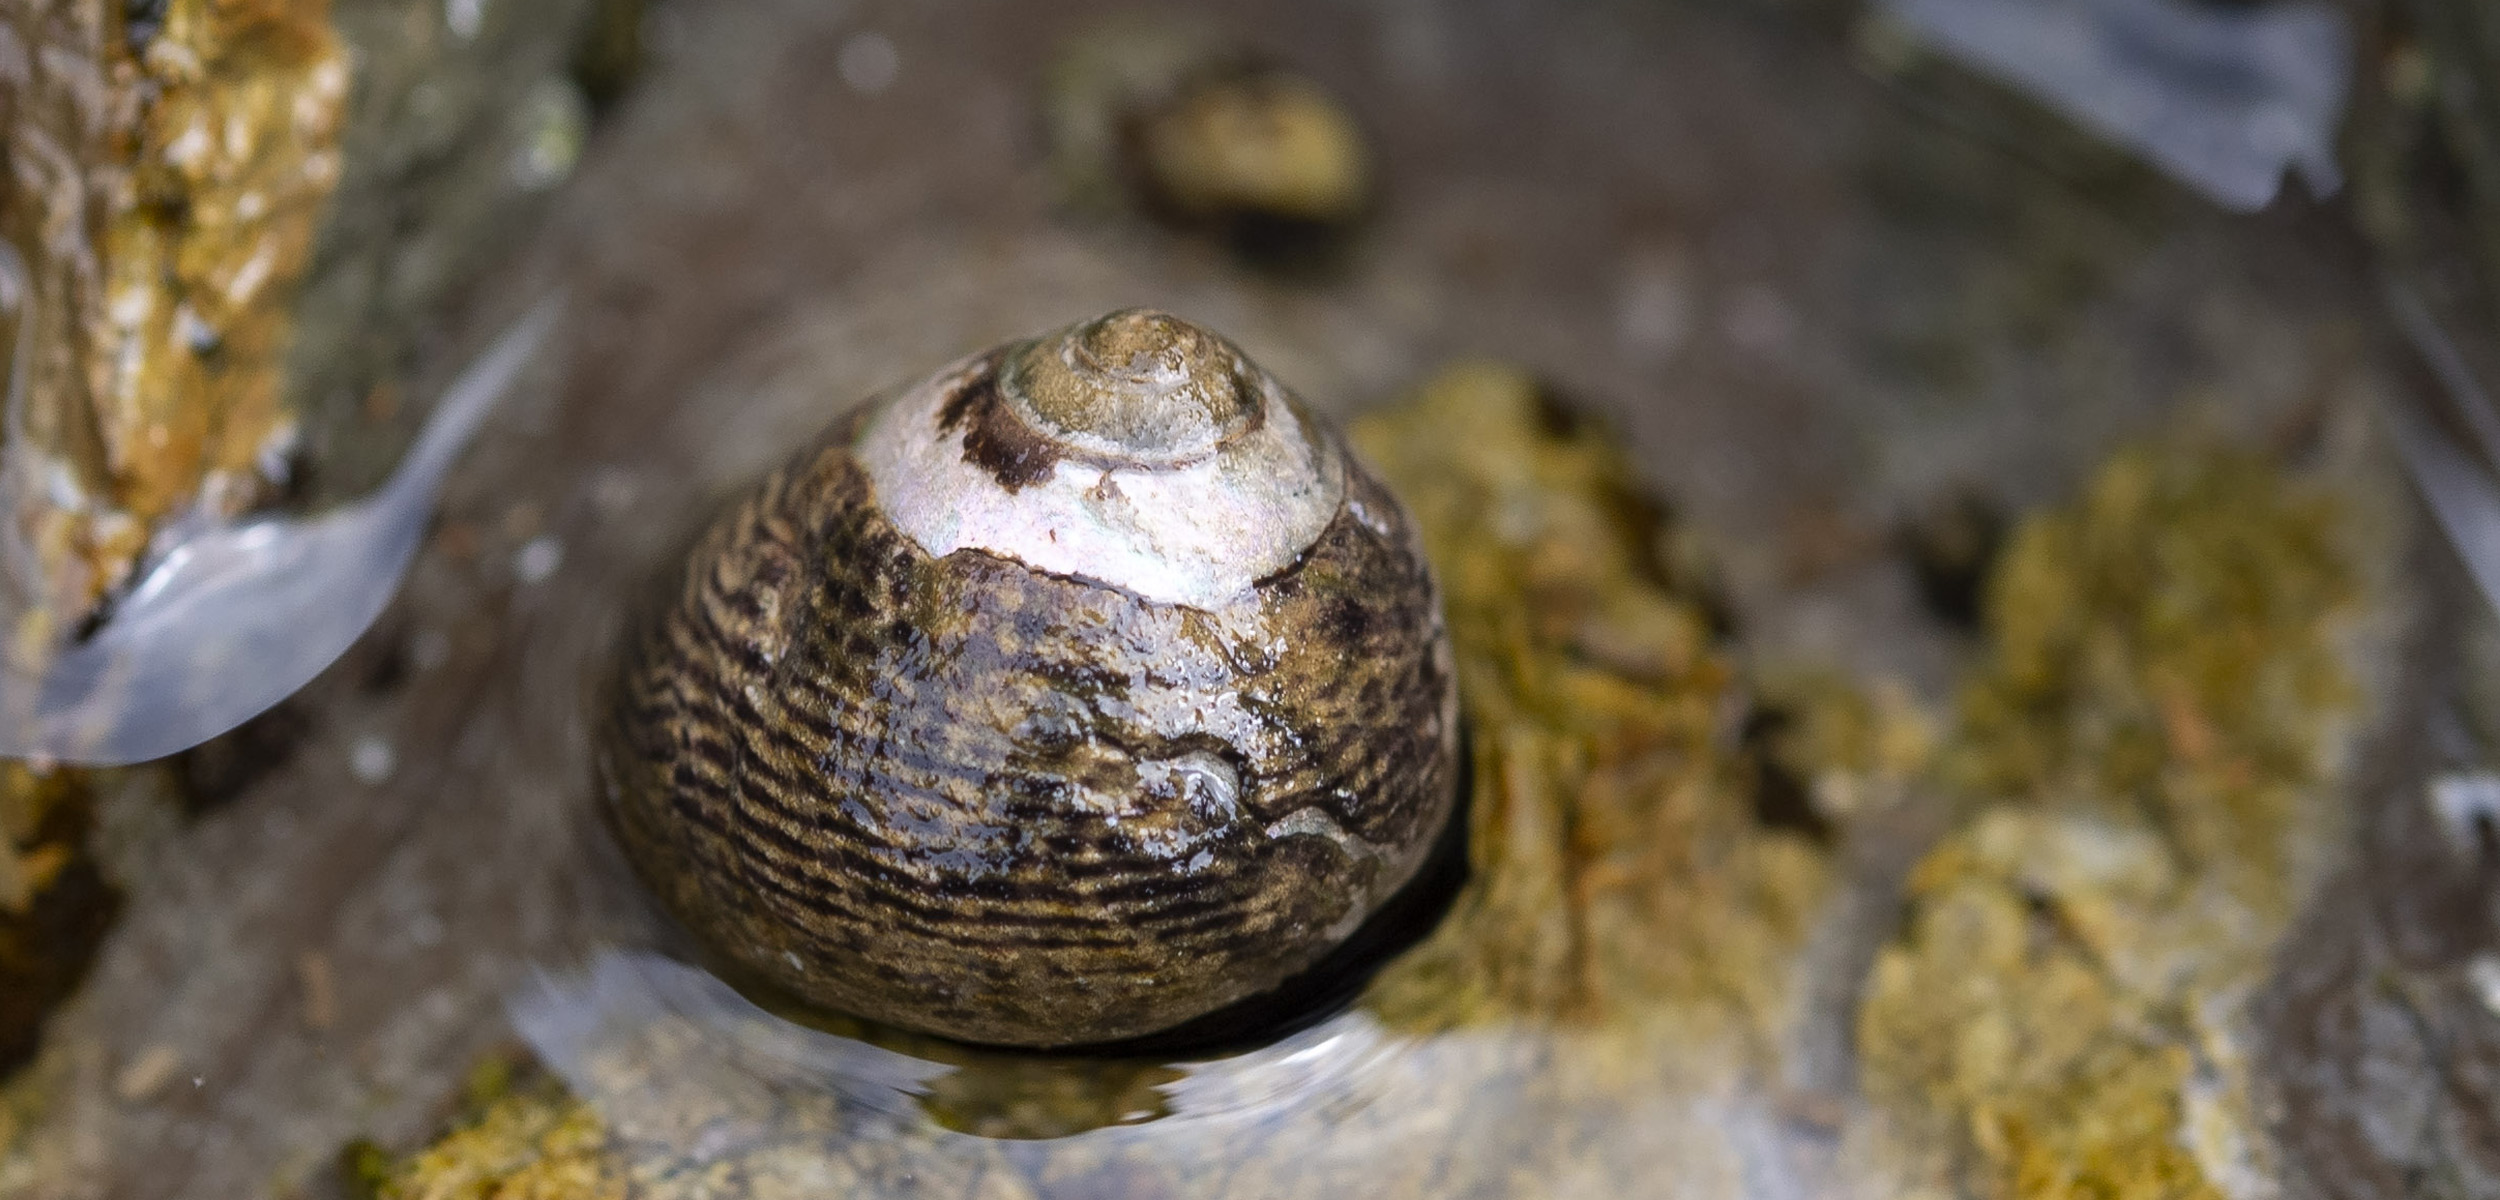 A close up shot of a black and brown snail shell sitting on a rock with green algae on it